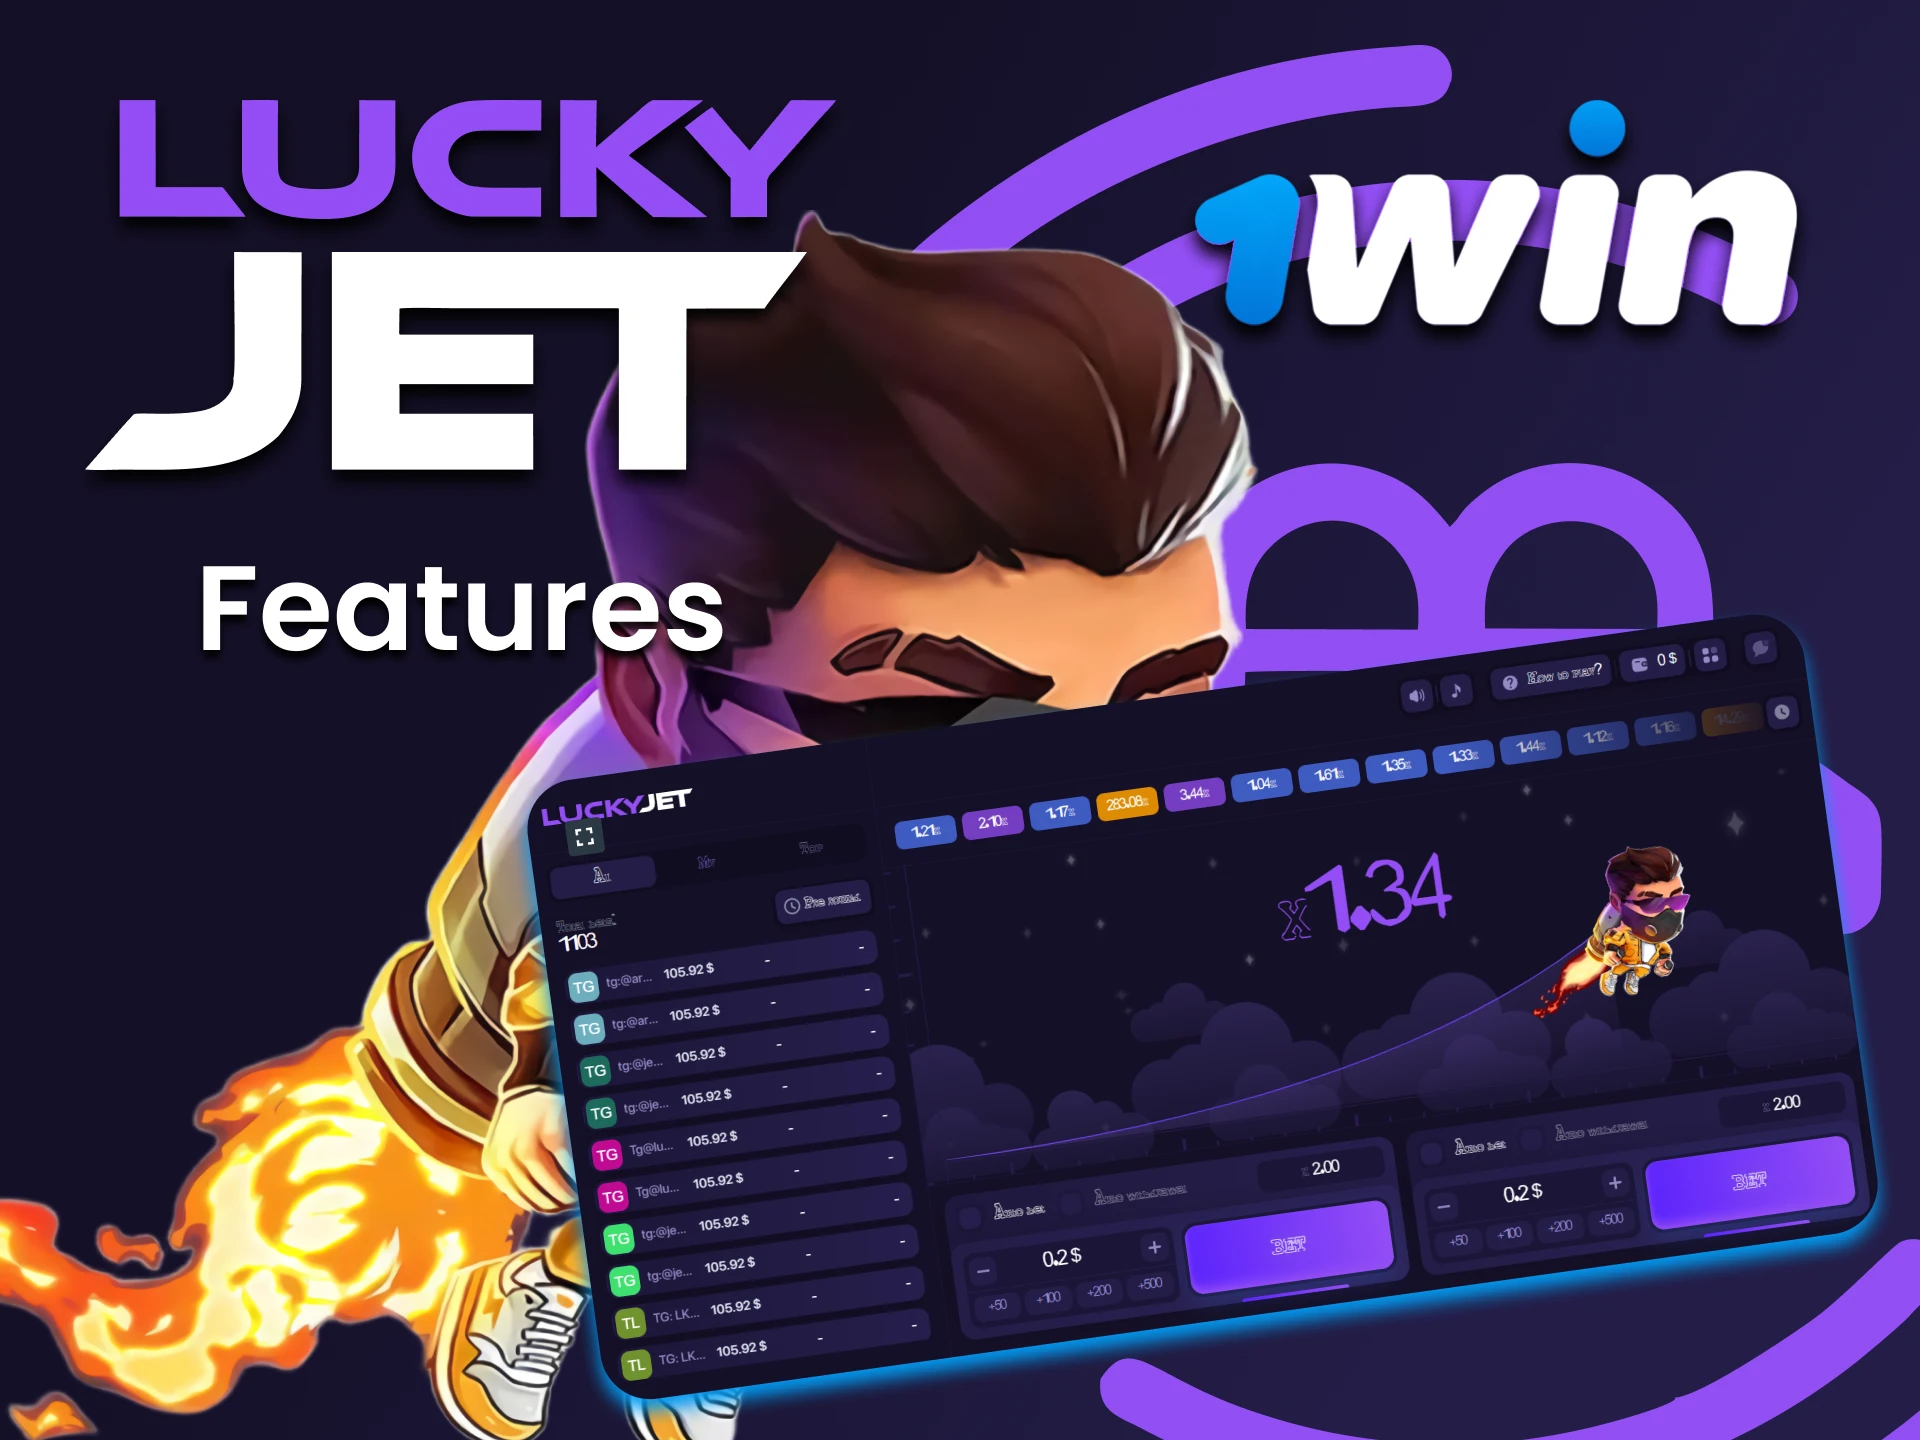 Find out what the future holds for Lucky Jet at 1win.